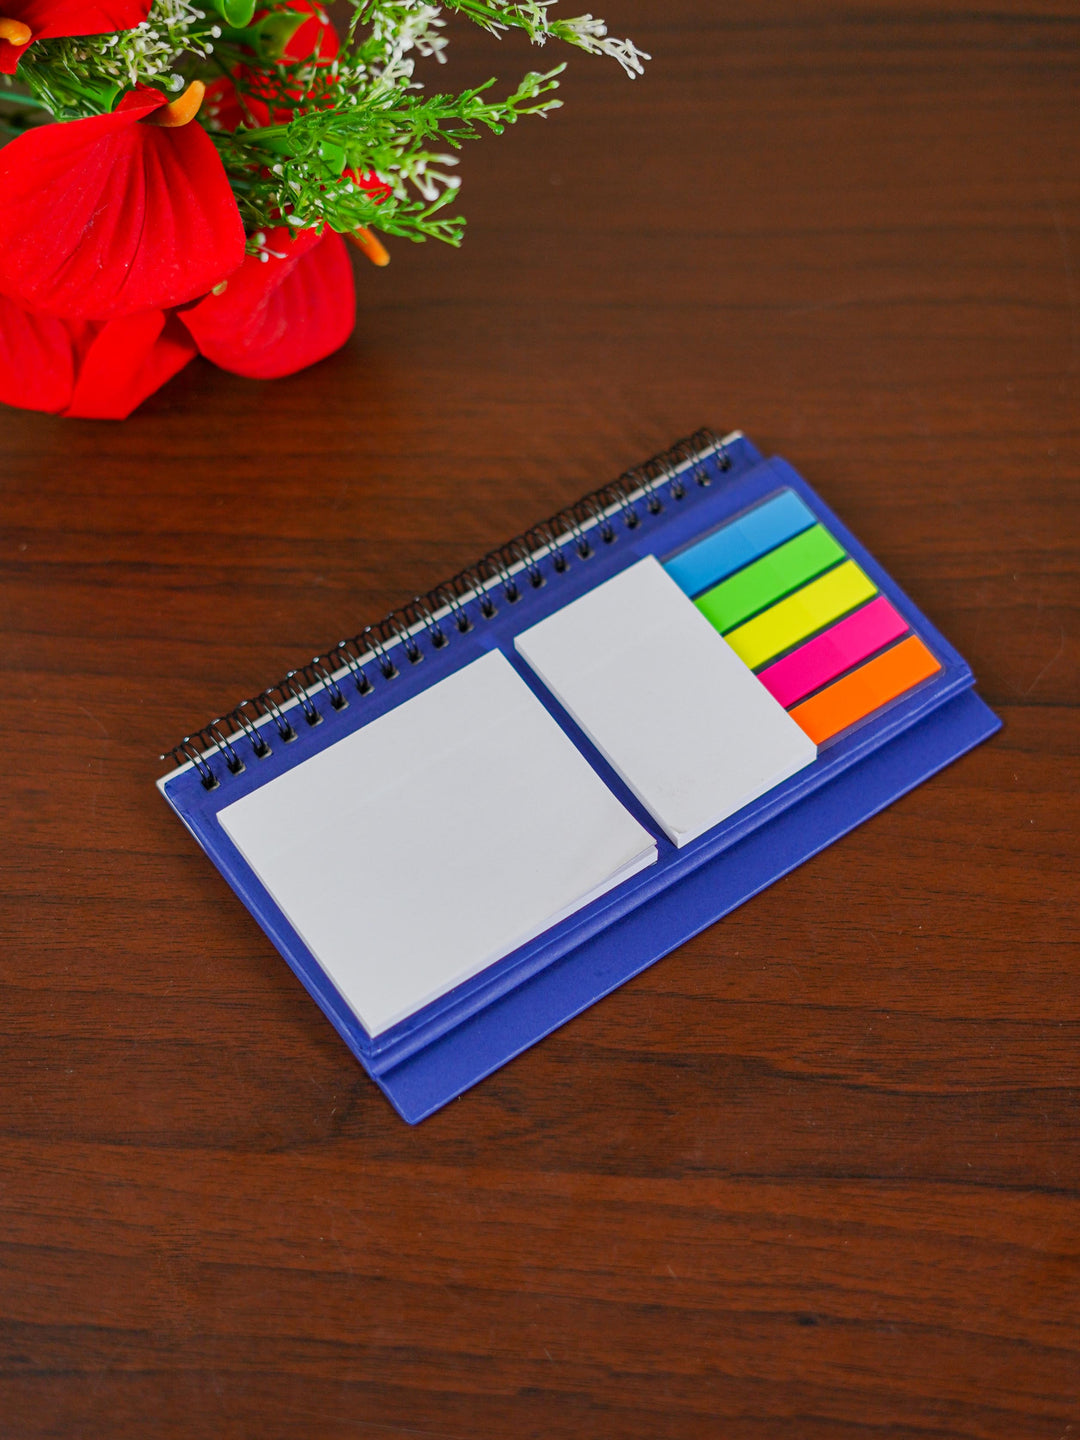 Corporate Gift - Calendar with Sticky Notes - BCG0151